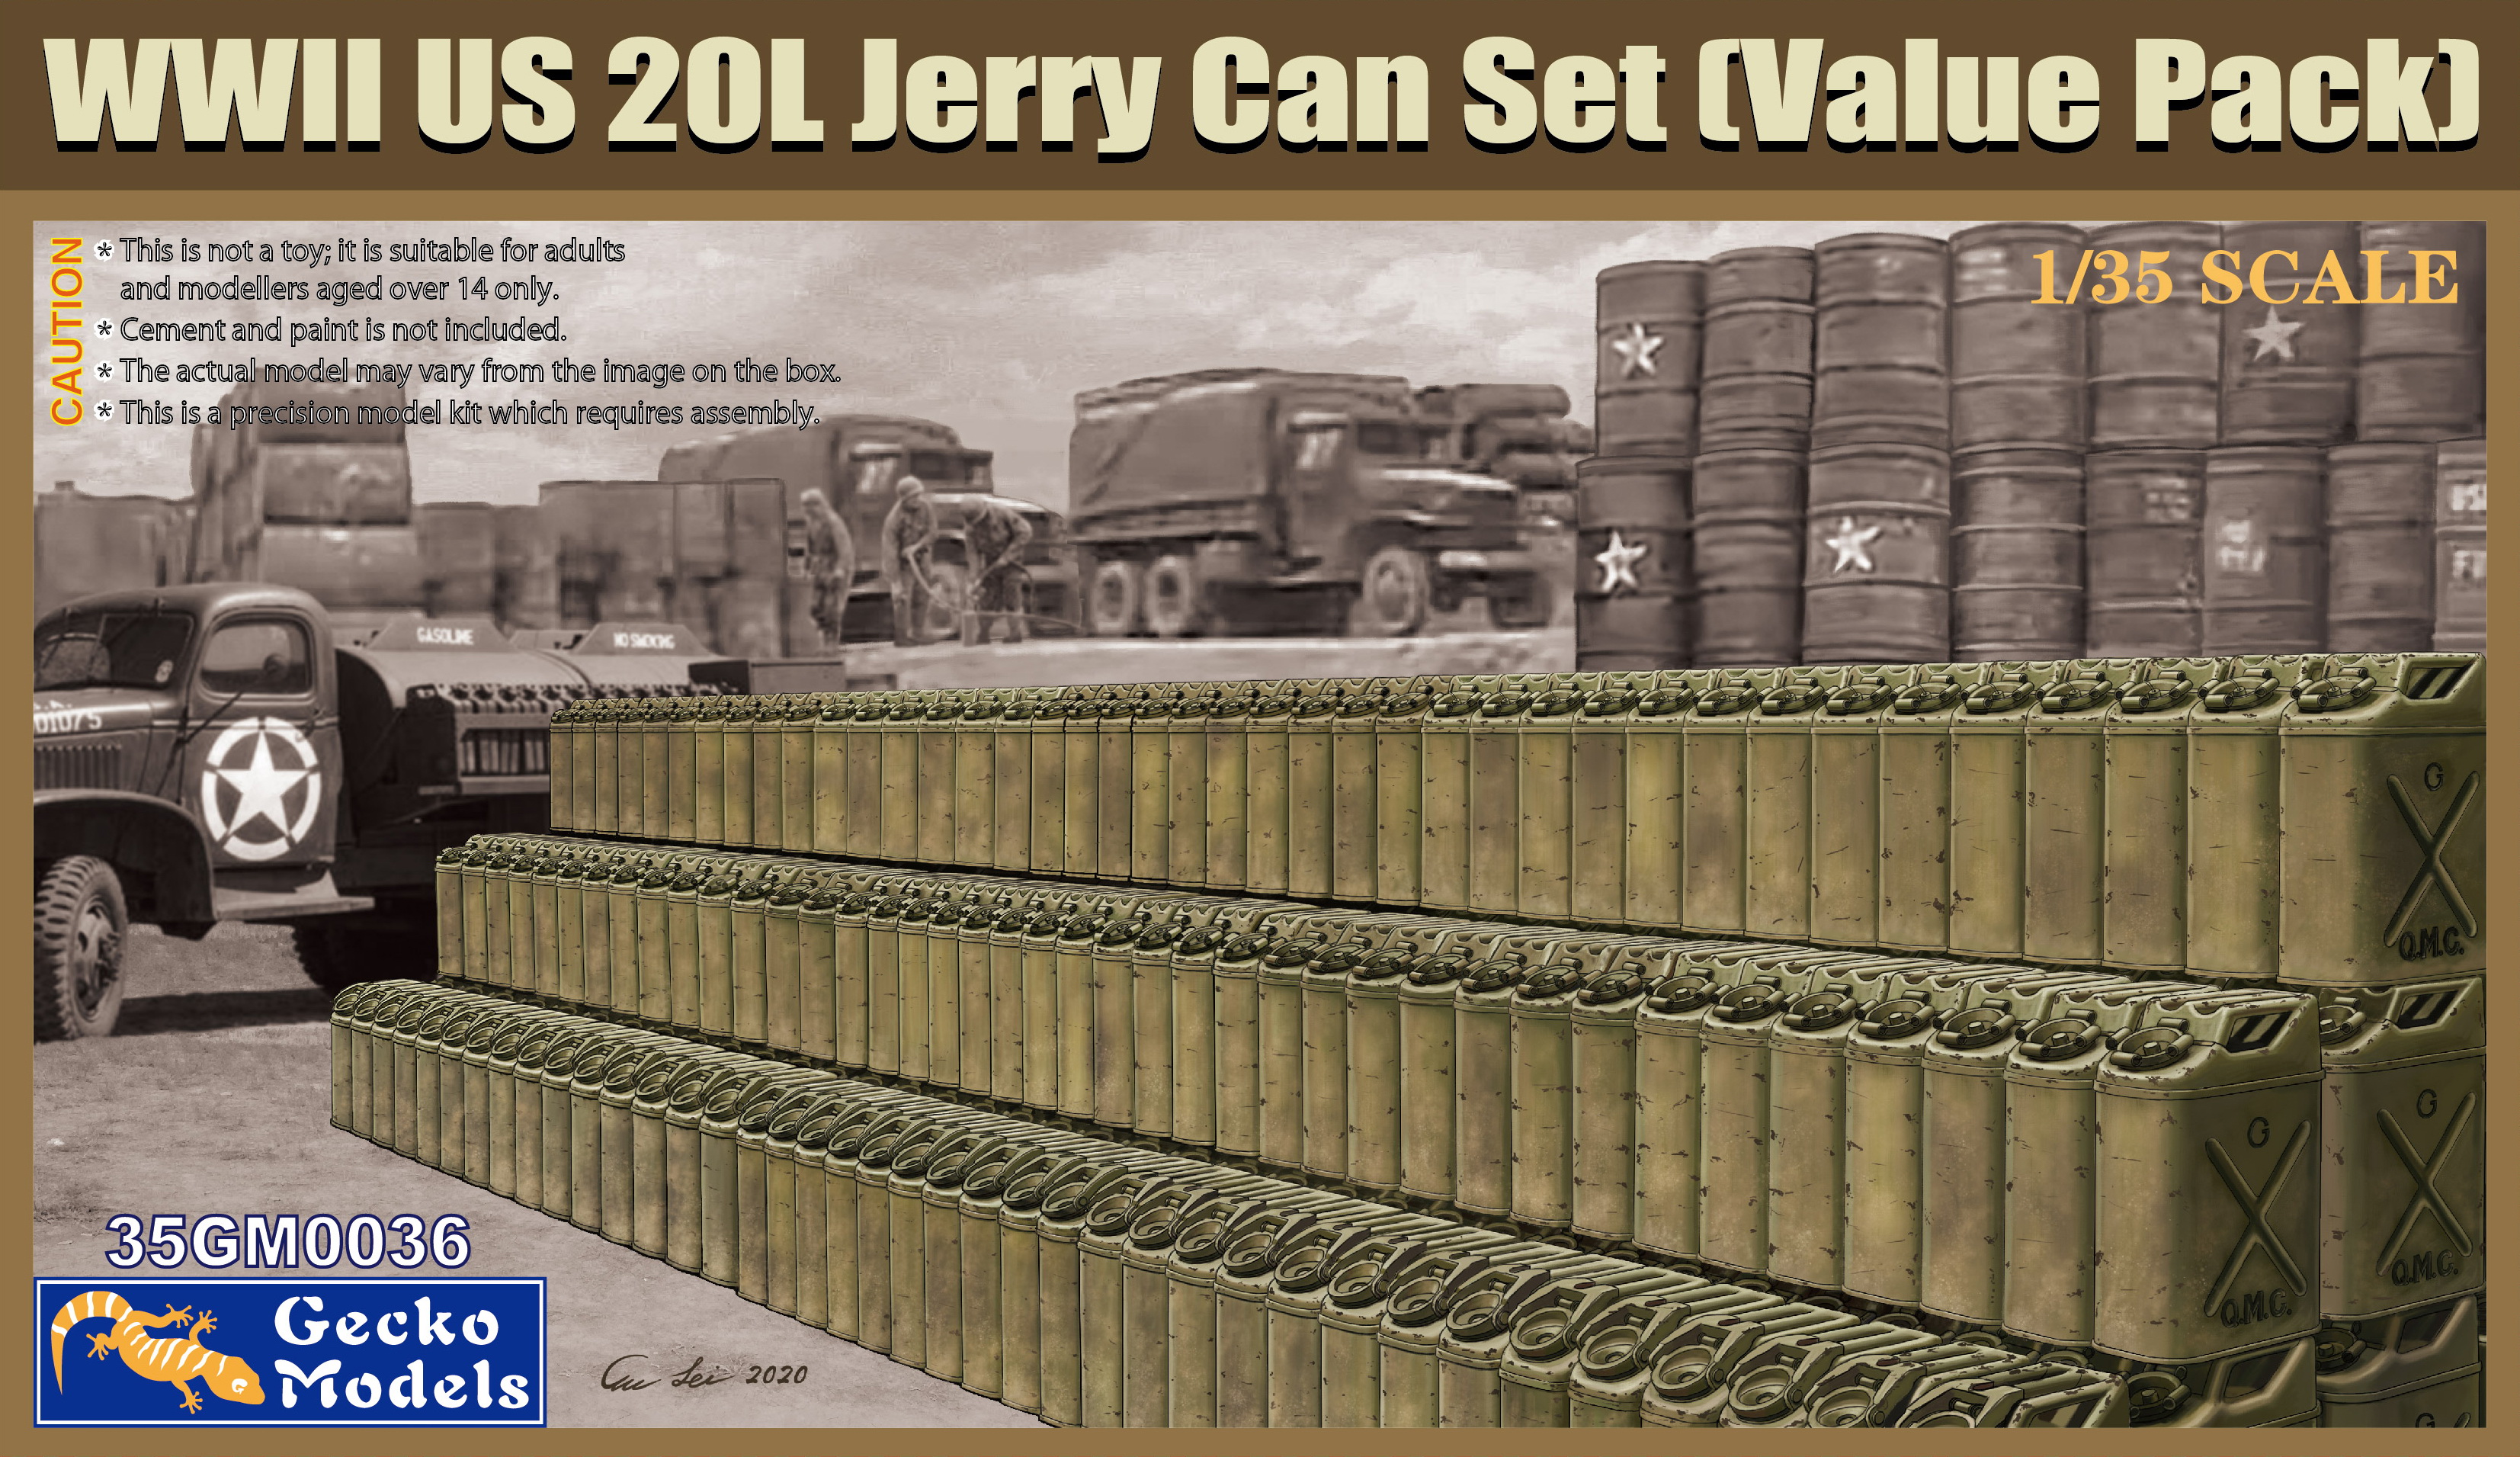 WWII US 20L Jerry Can Set (Value pack)